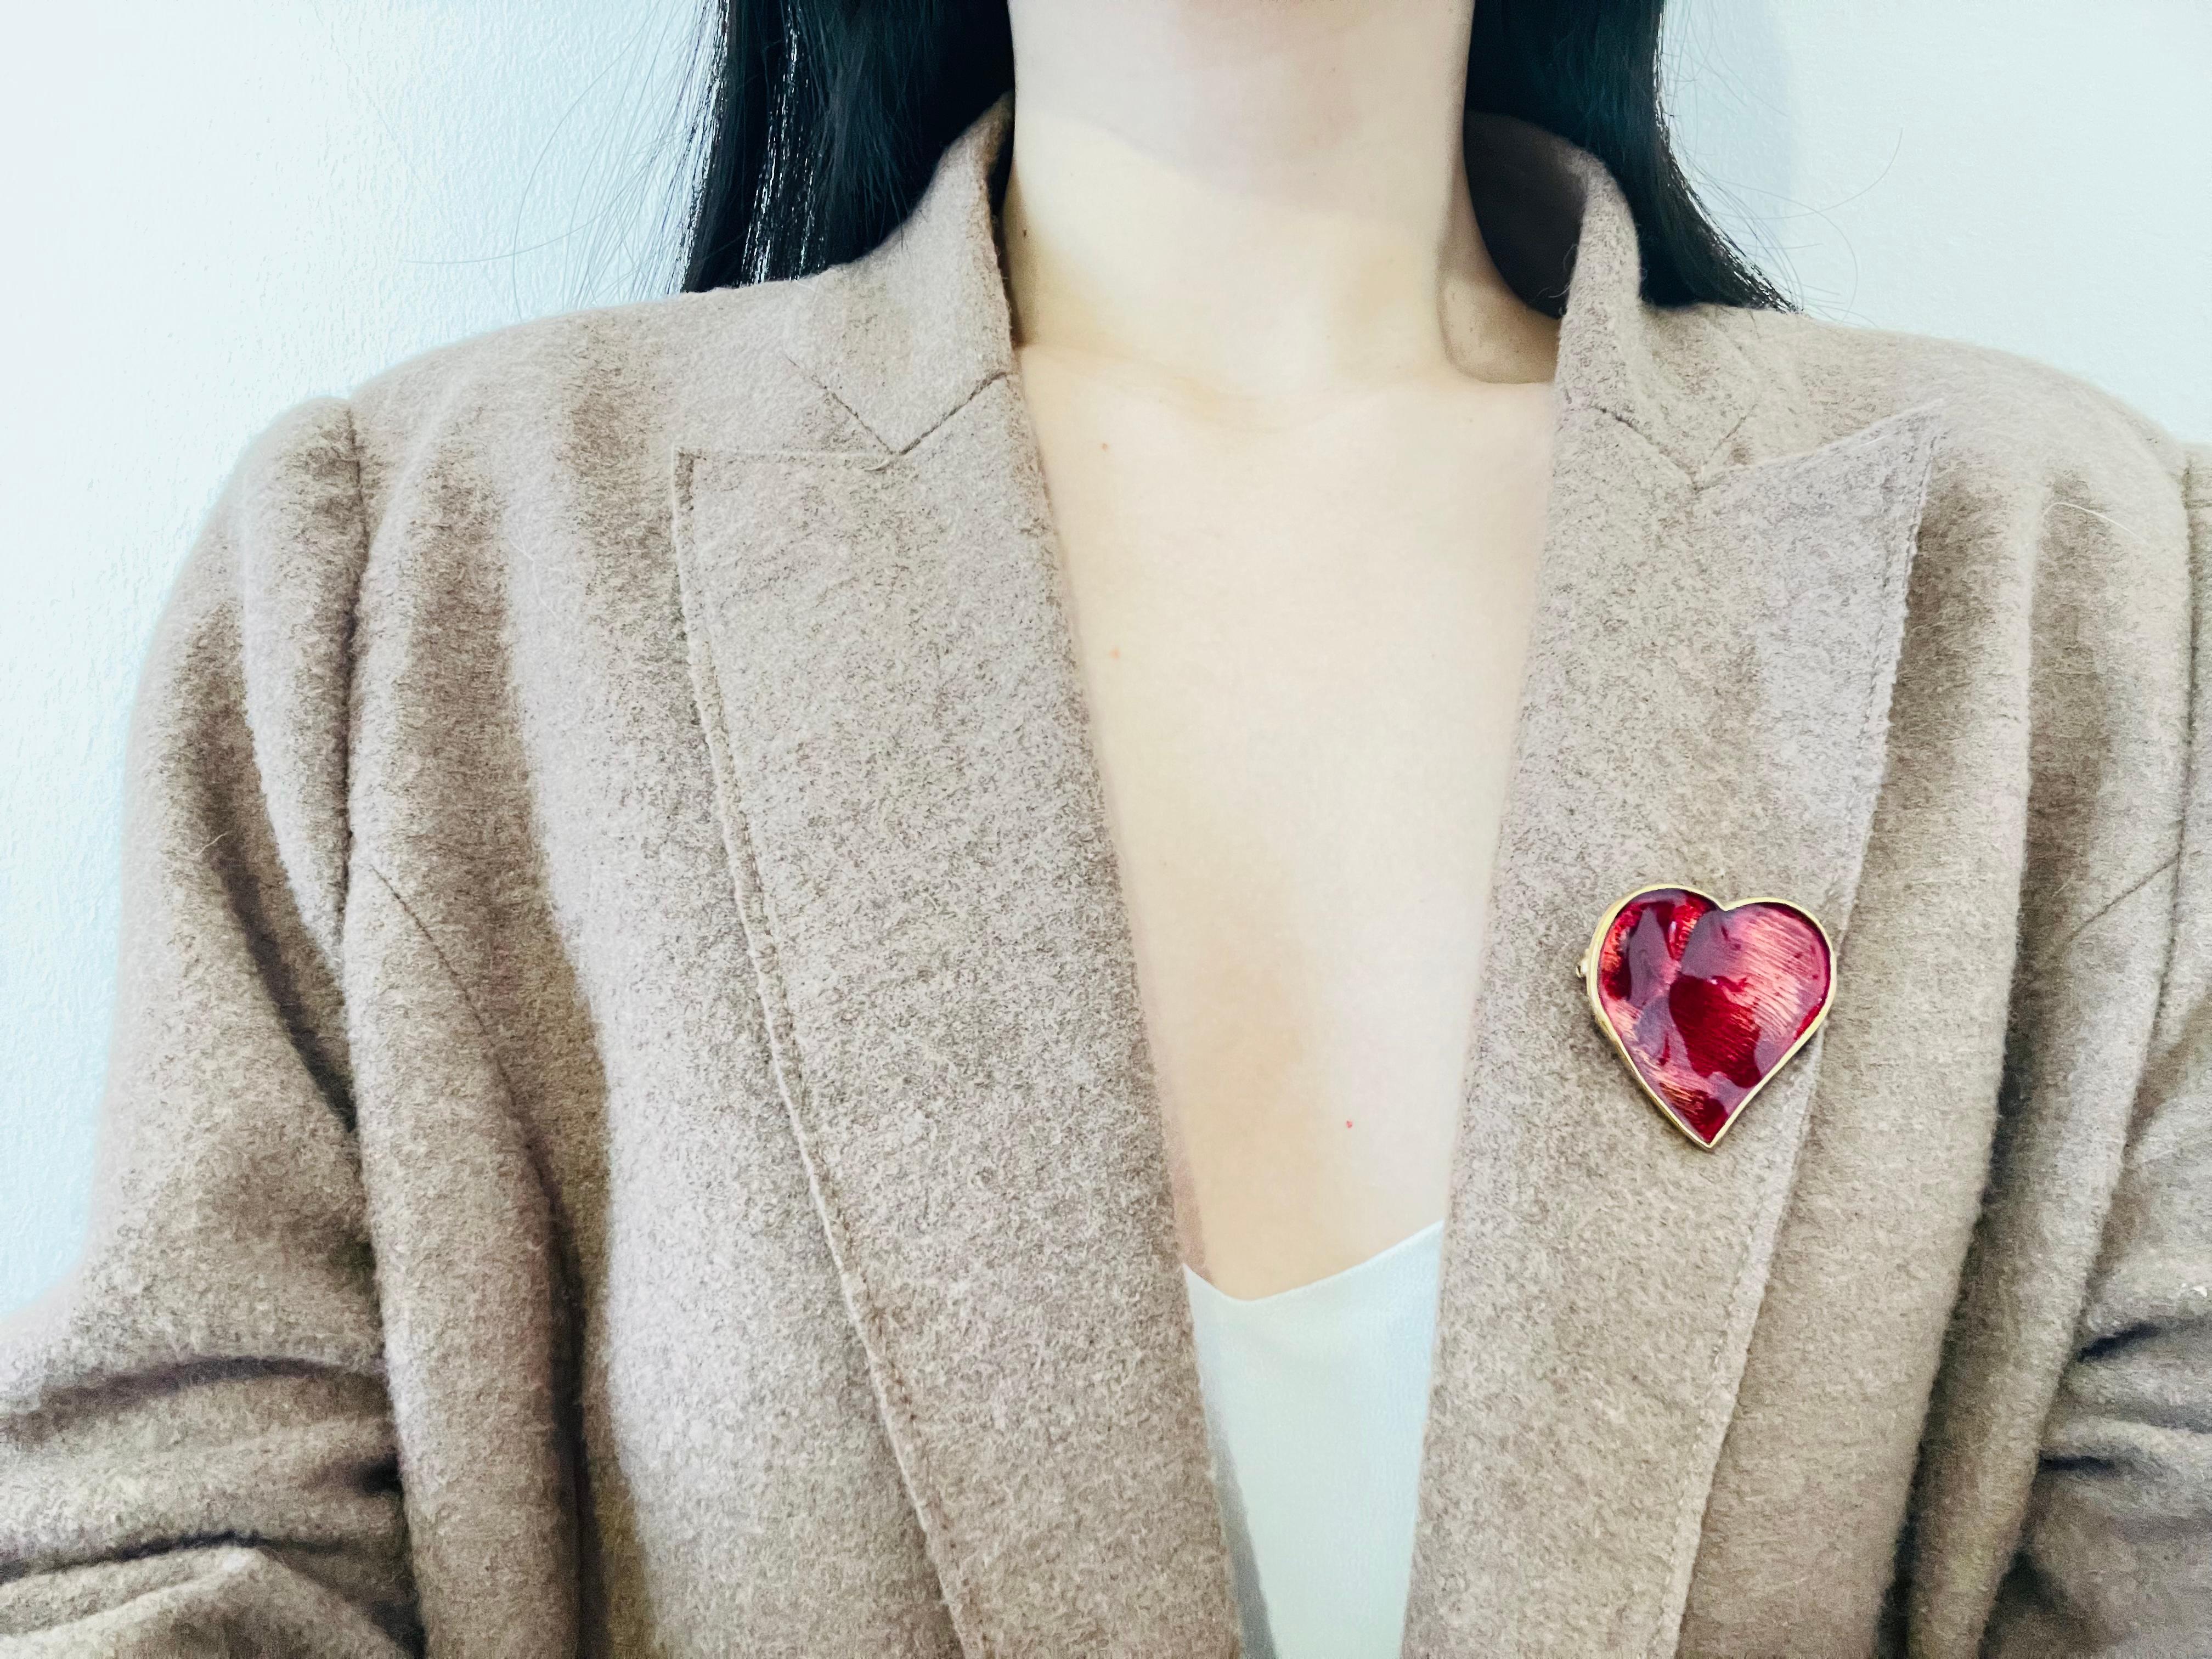 Yves Saint Laurent YSL Vintage 1990s Red Heart Enamel Love Pendent Brooch Pin In Excellent Condition For Sale In Wokingham, England